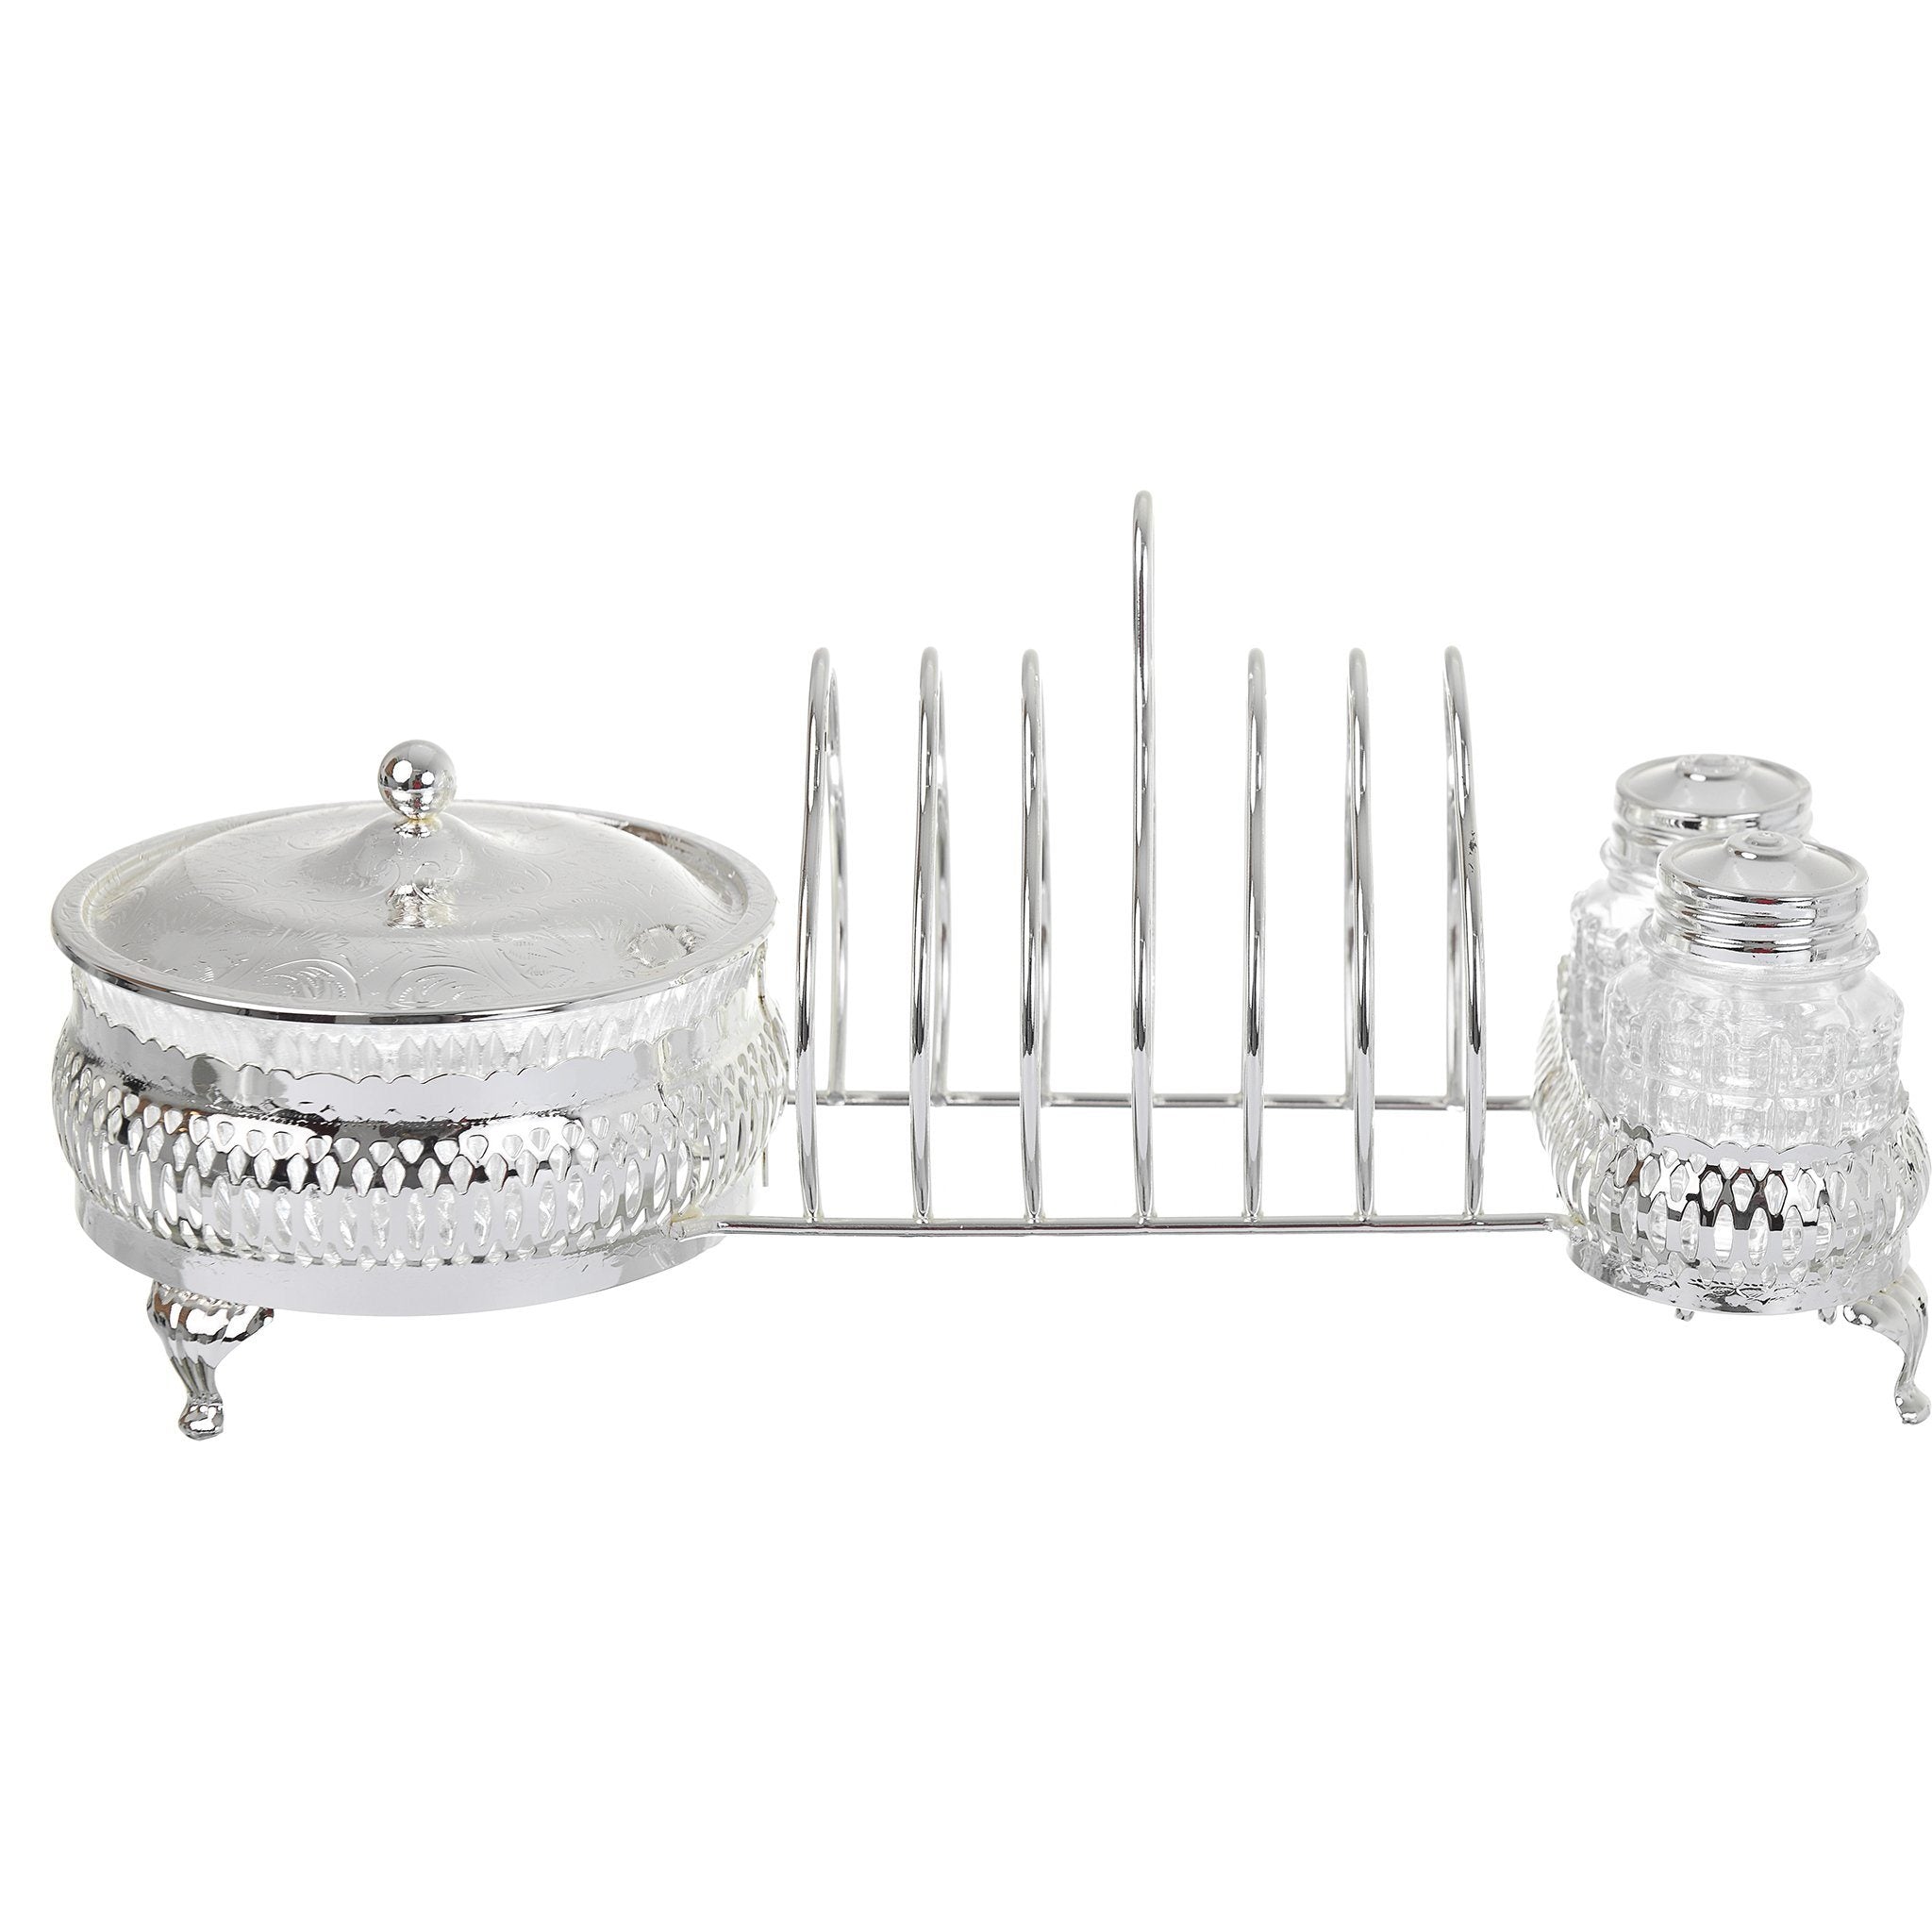 Queen Anne - Toast Rack with Butter Dish & Salt & Pepper Shakers - Silver Plated Metal with Glass - 26000435